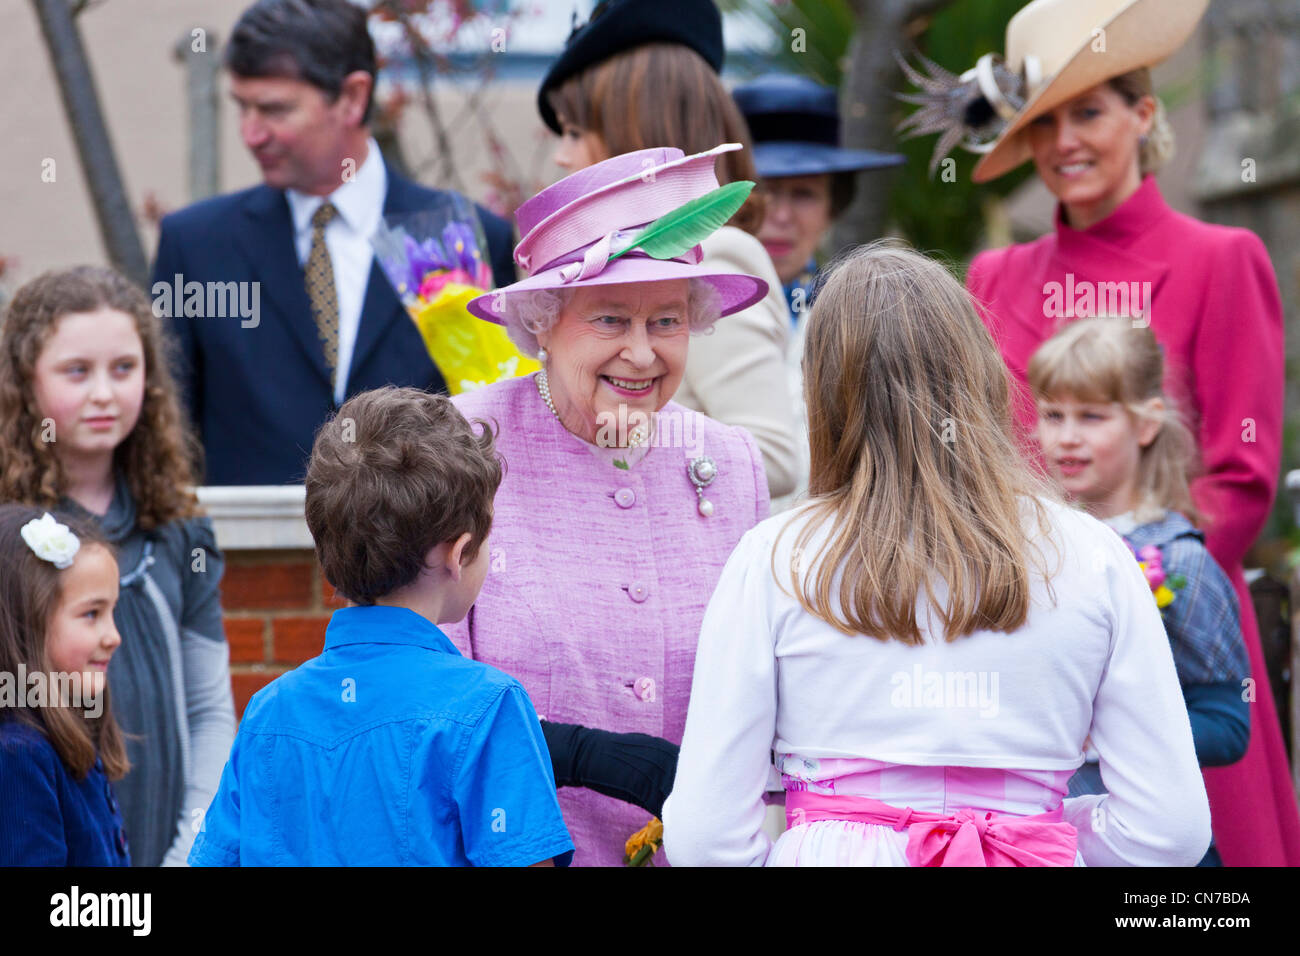 Her Majesty Queen Elizabeth II smiling with members of the Royal Family at Windsor Castle Easter Sunday 2012. PER0154 Stock Photo